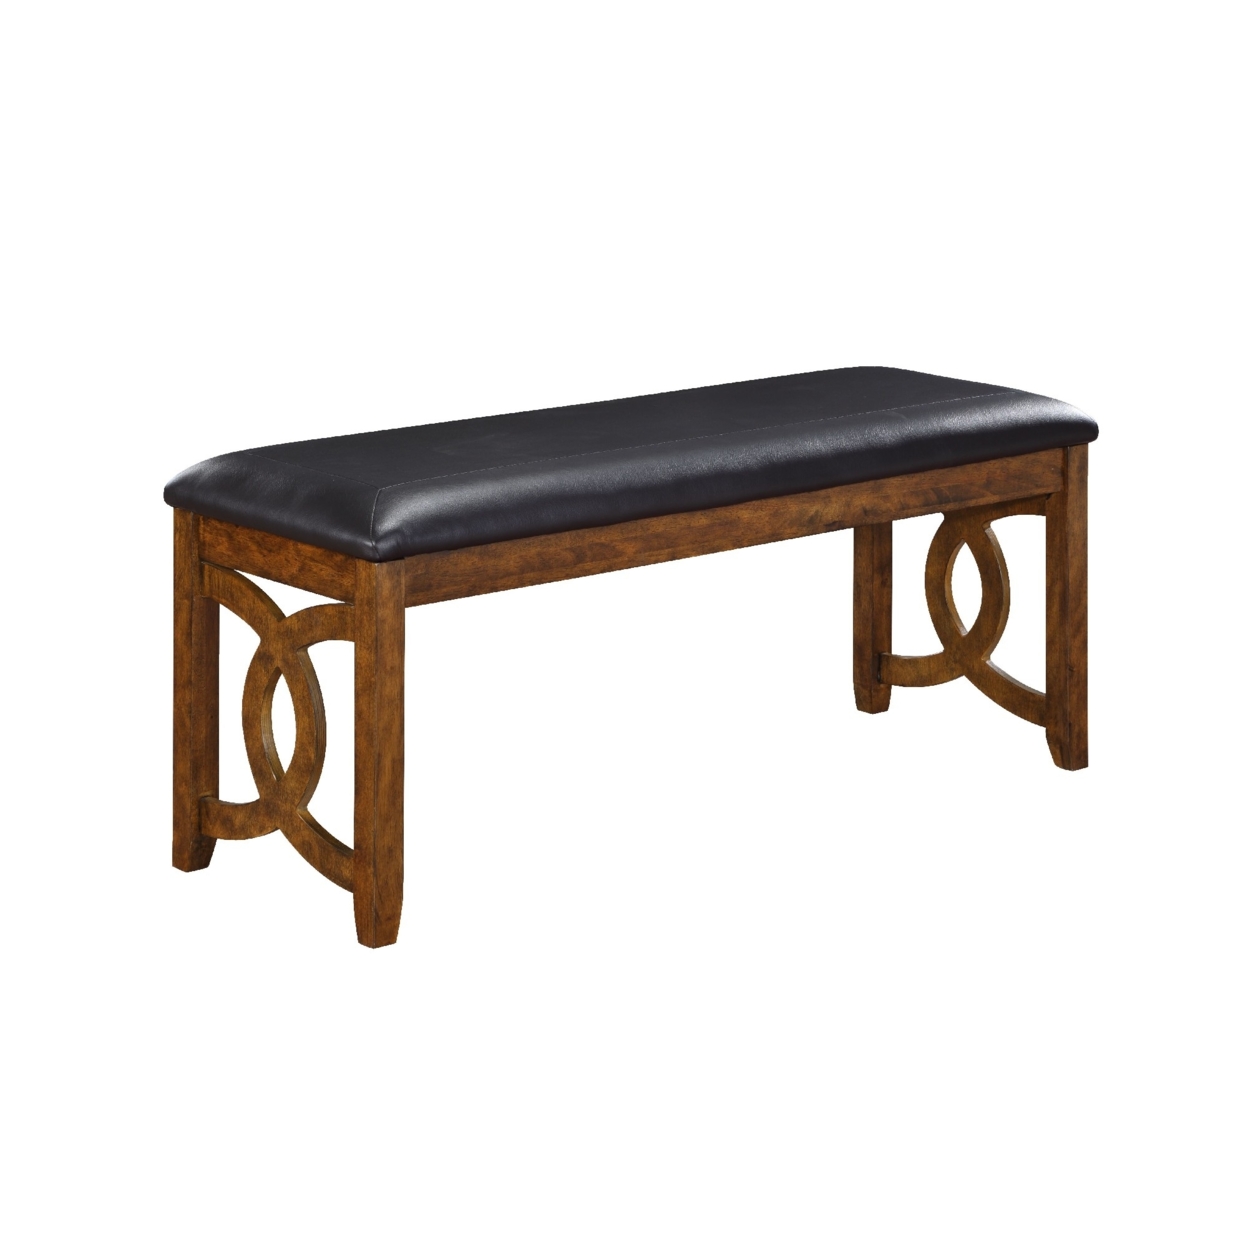 Gary 46 Inch Wood Bench With Leatherette Seat, Brown- Saltoro Sherpi